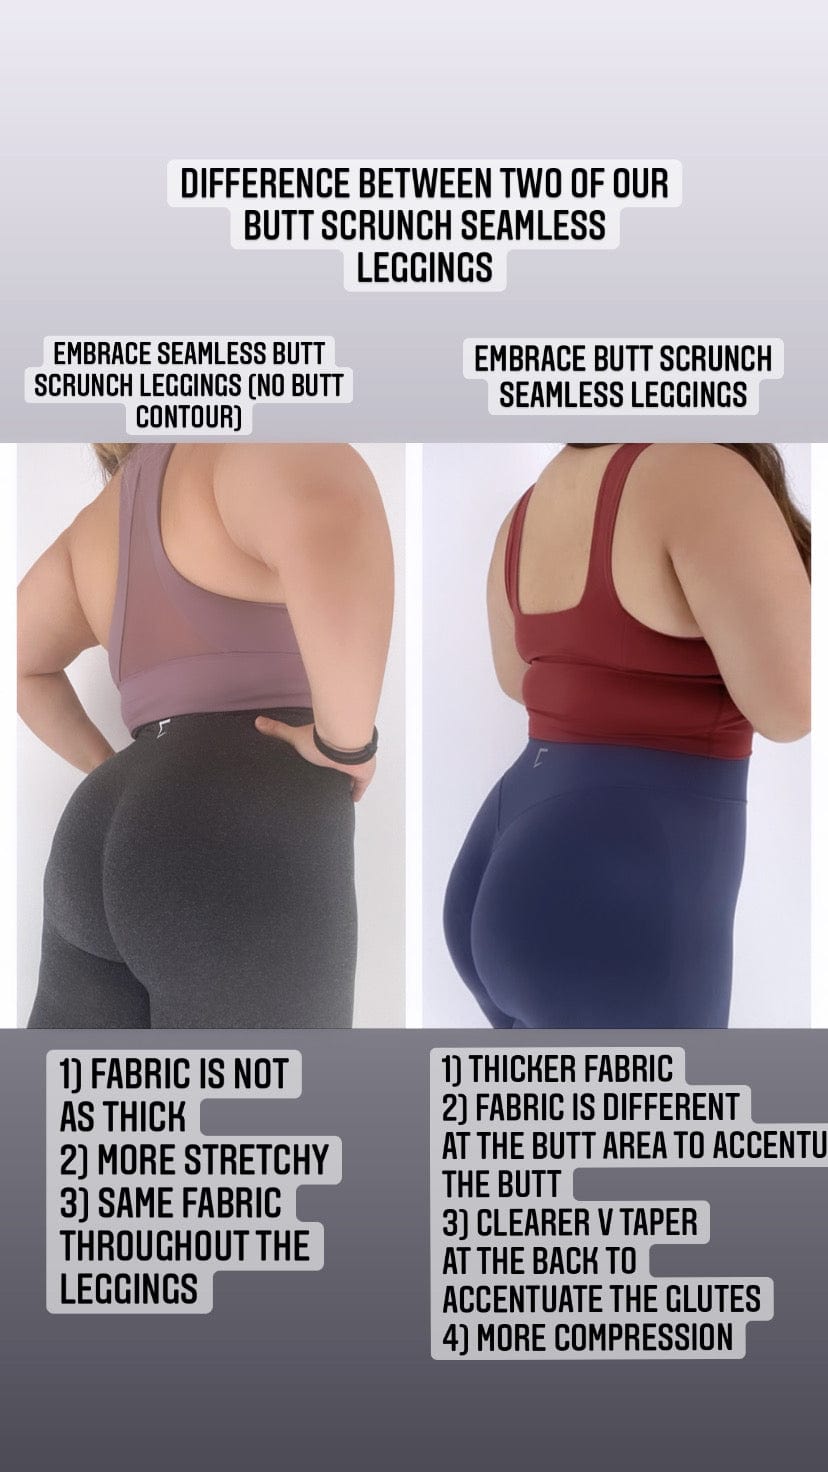 Embrace butt scrunch seamless leggings V1 (22 inch inseam)-(cutting more compressive and smaller) so size up